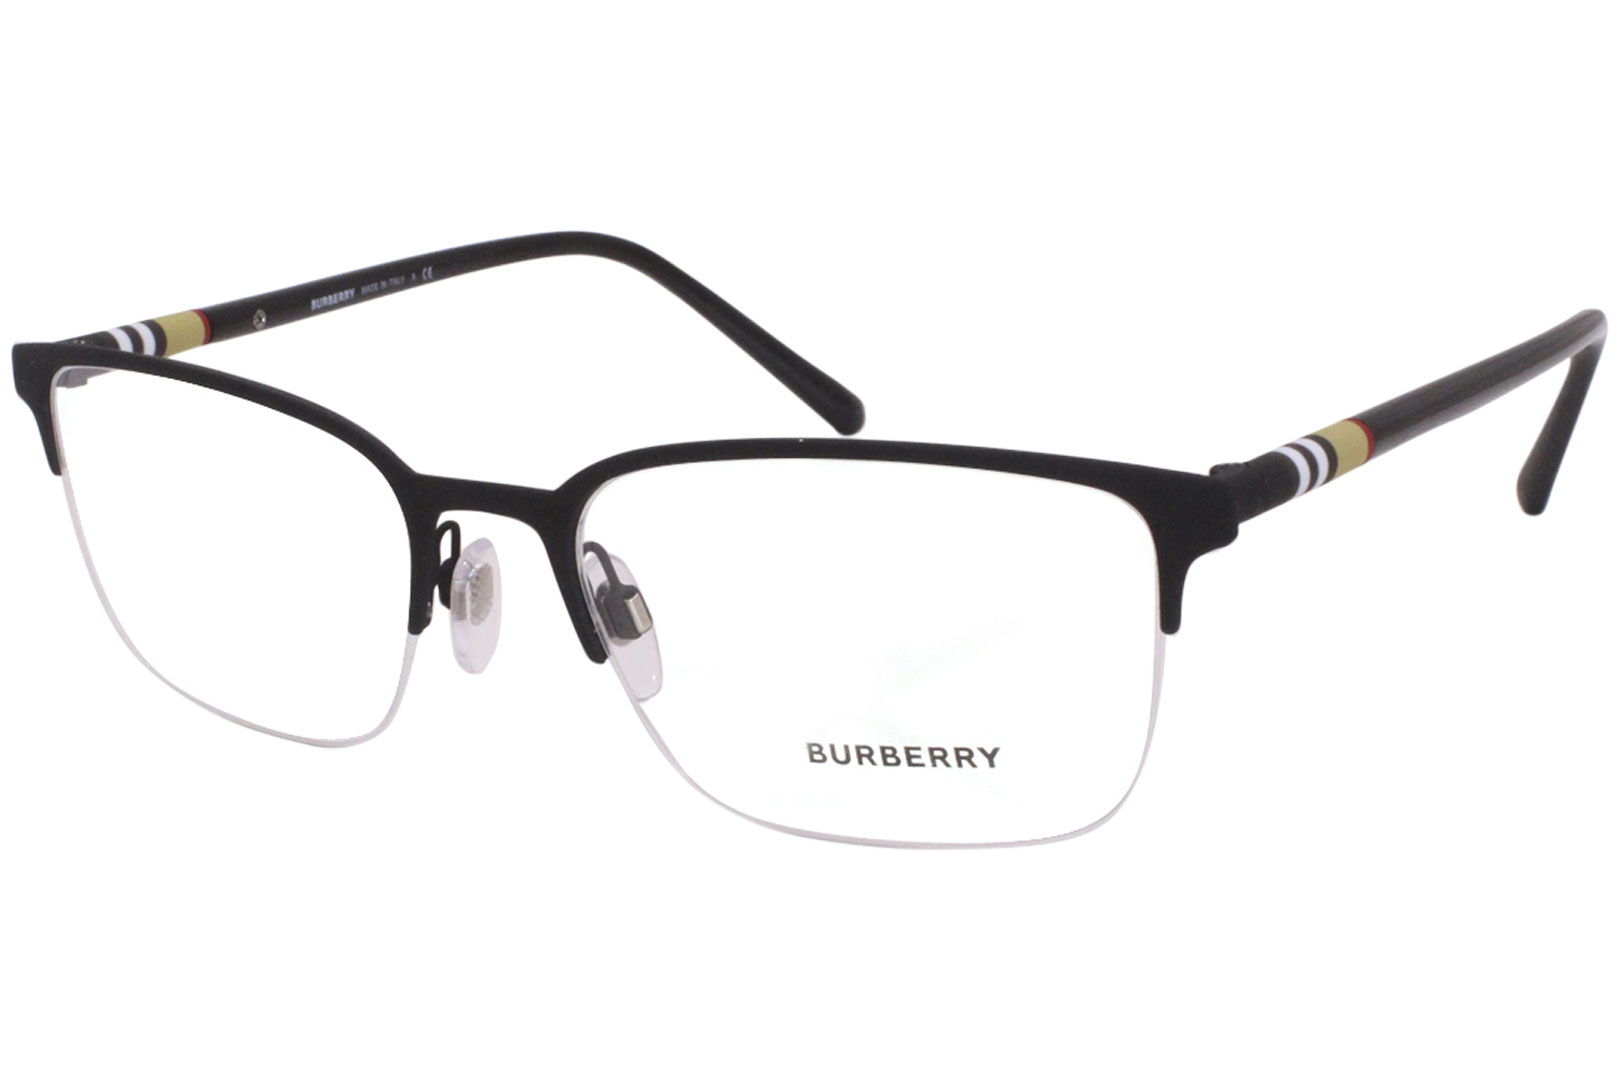 Burberry – Path Finders